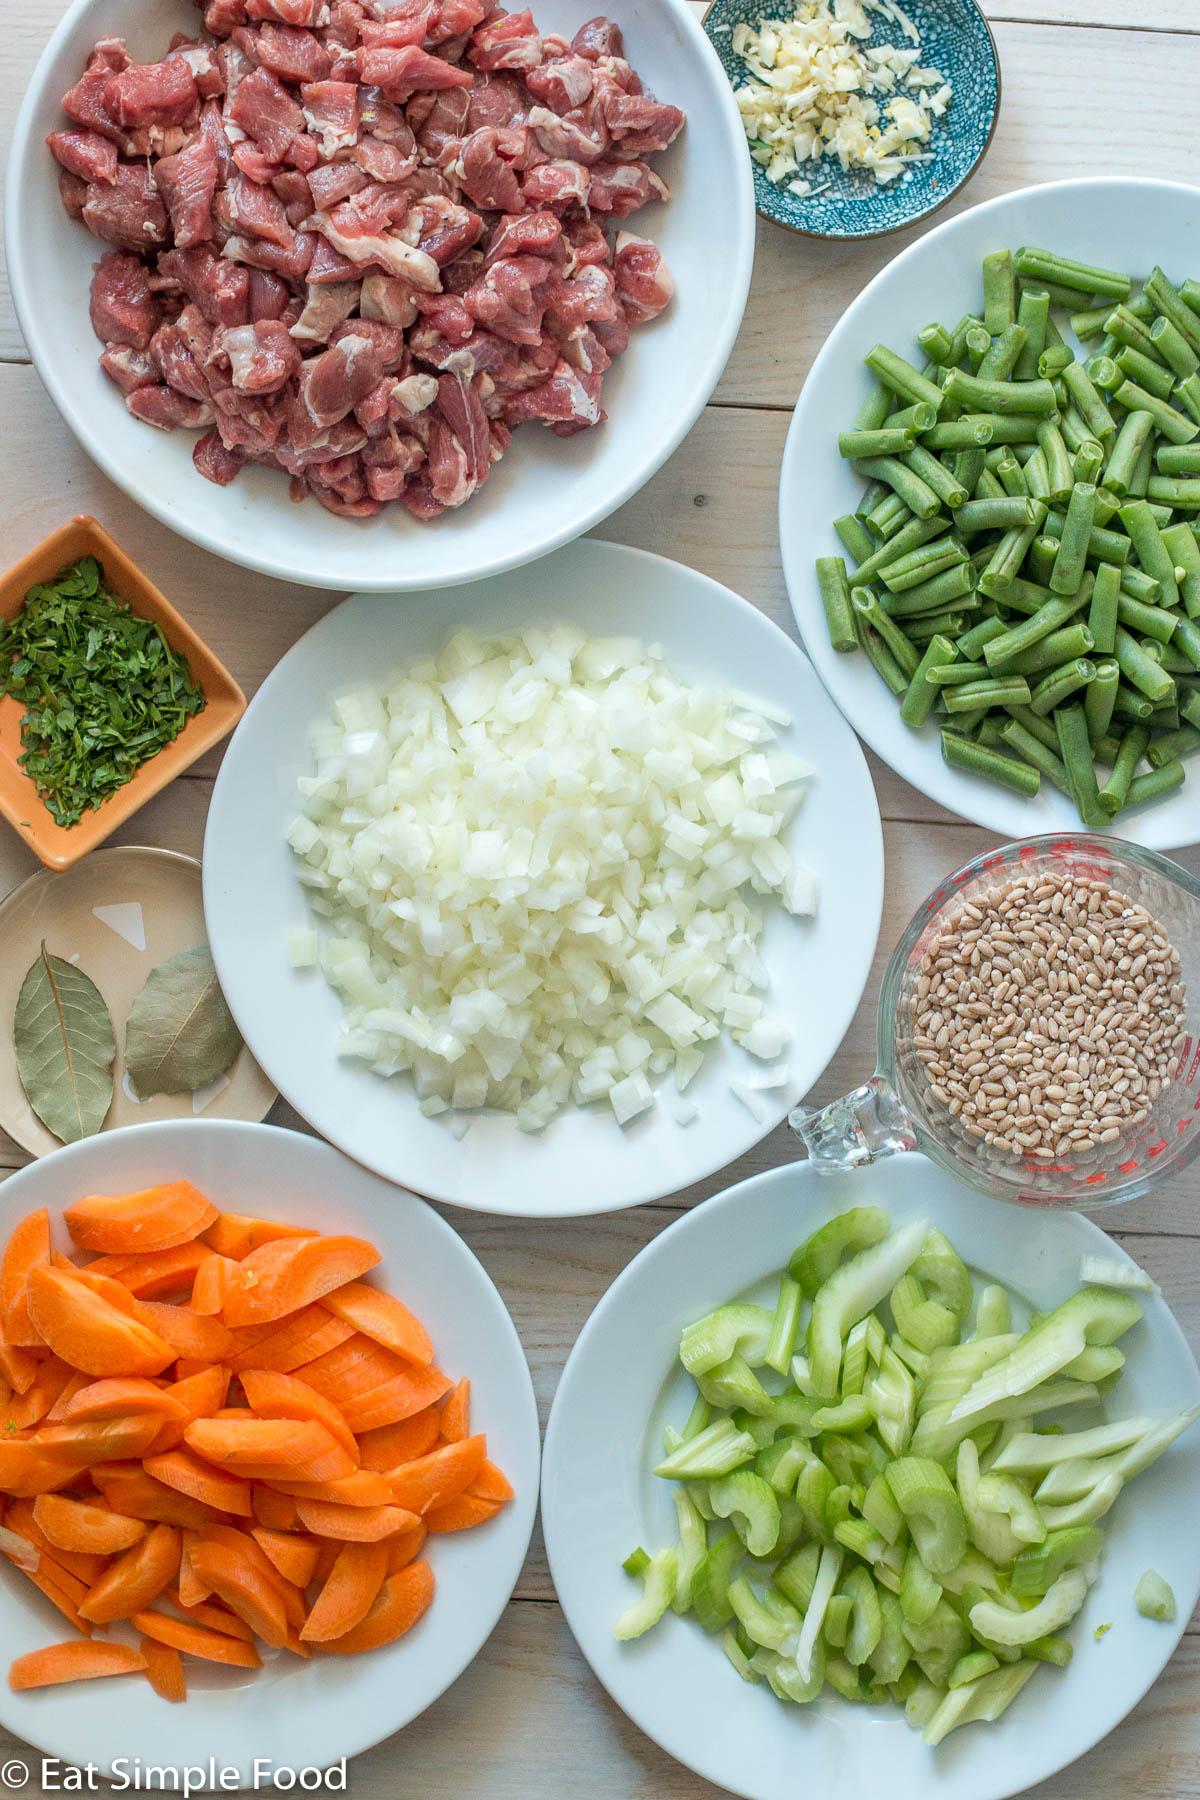 Top view of raw ingredients: plate of raw cubed lamb shoulder, plate of onions, small bowl of garlic, small bowl of chopped parsley, 2 bay leaves, measuring cup of pearl barley, plate of chopped green beans, plate of sliced carrots, plate of sliced celery.